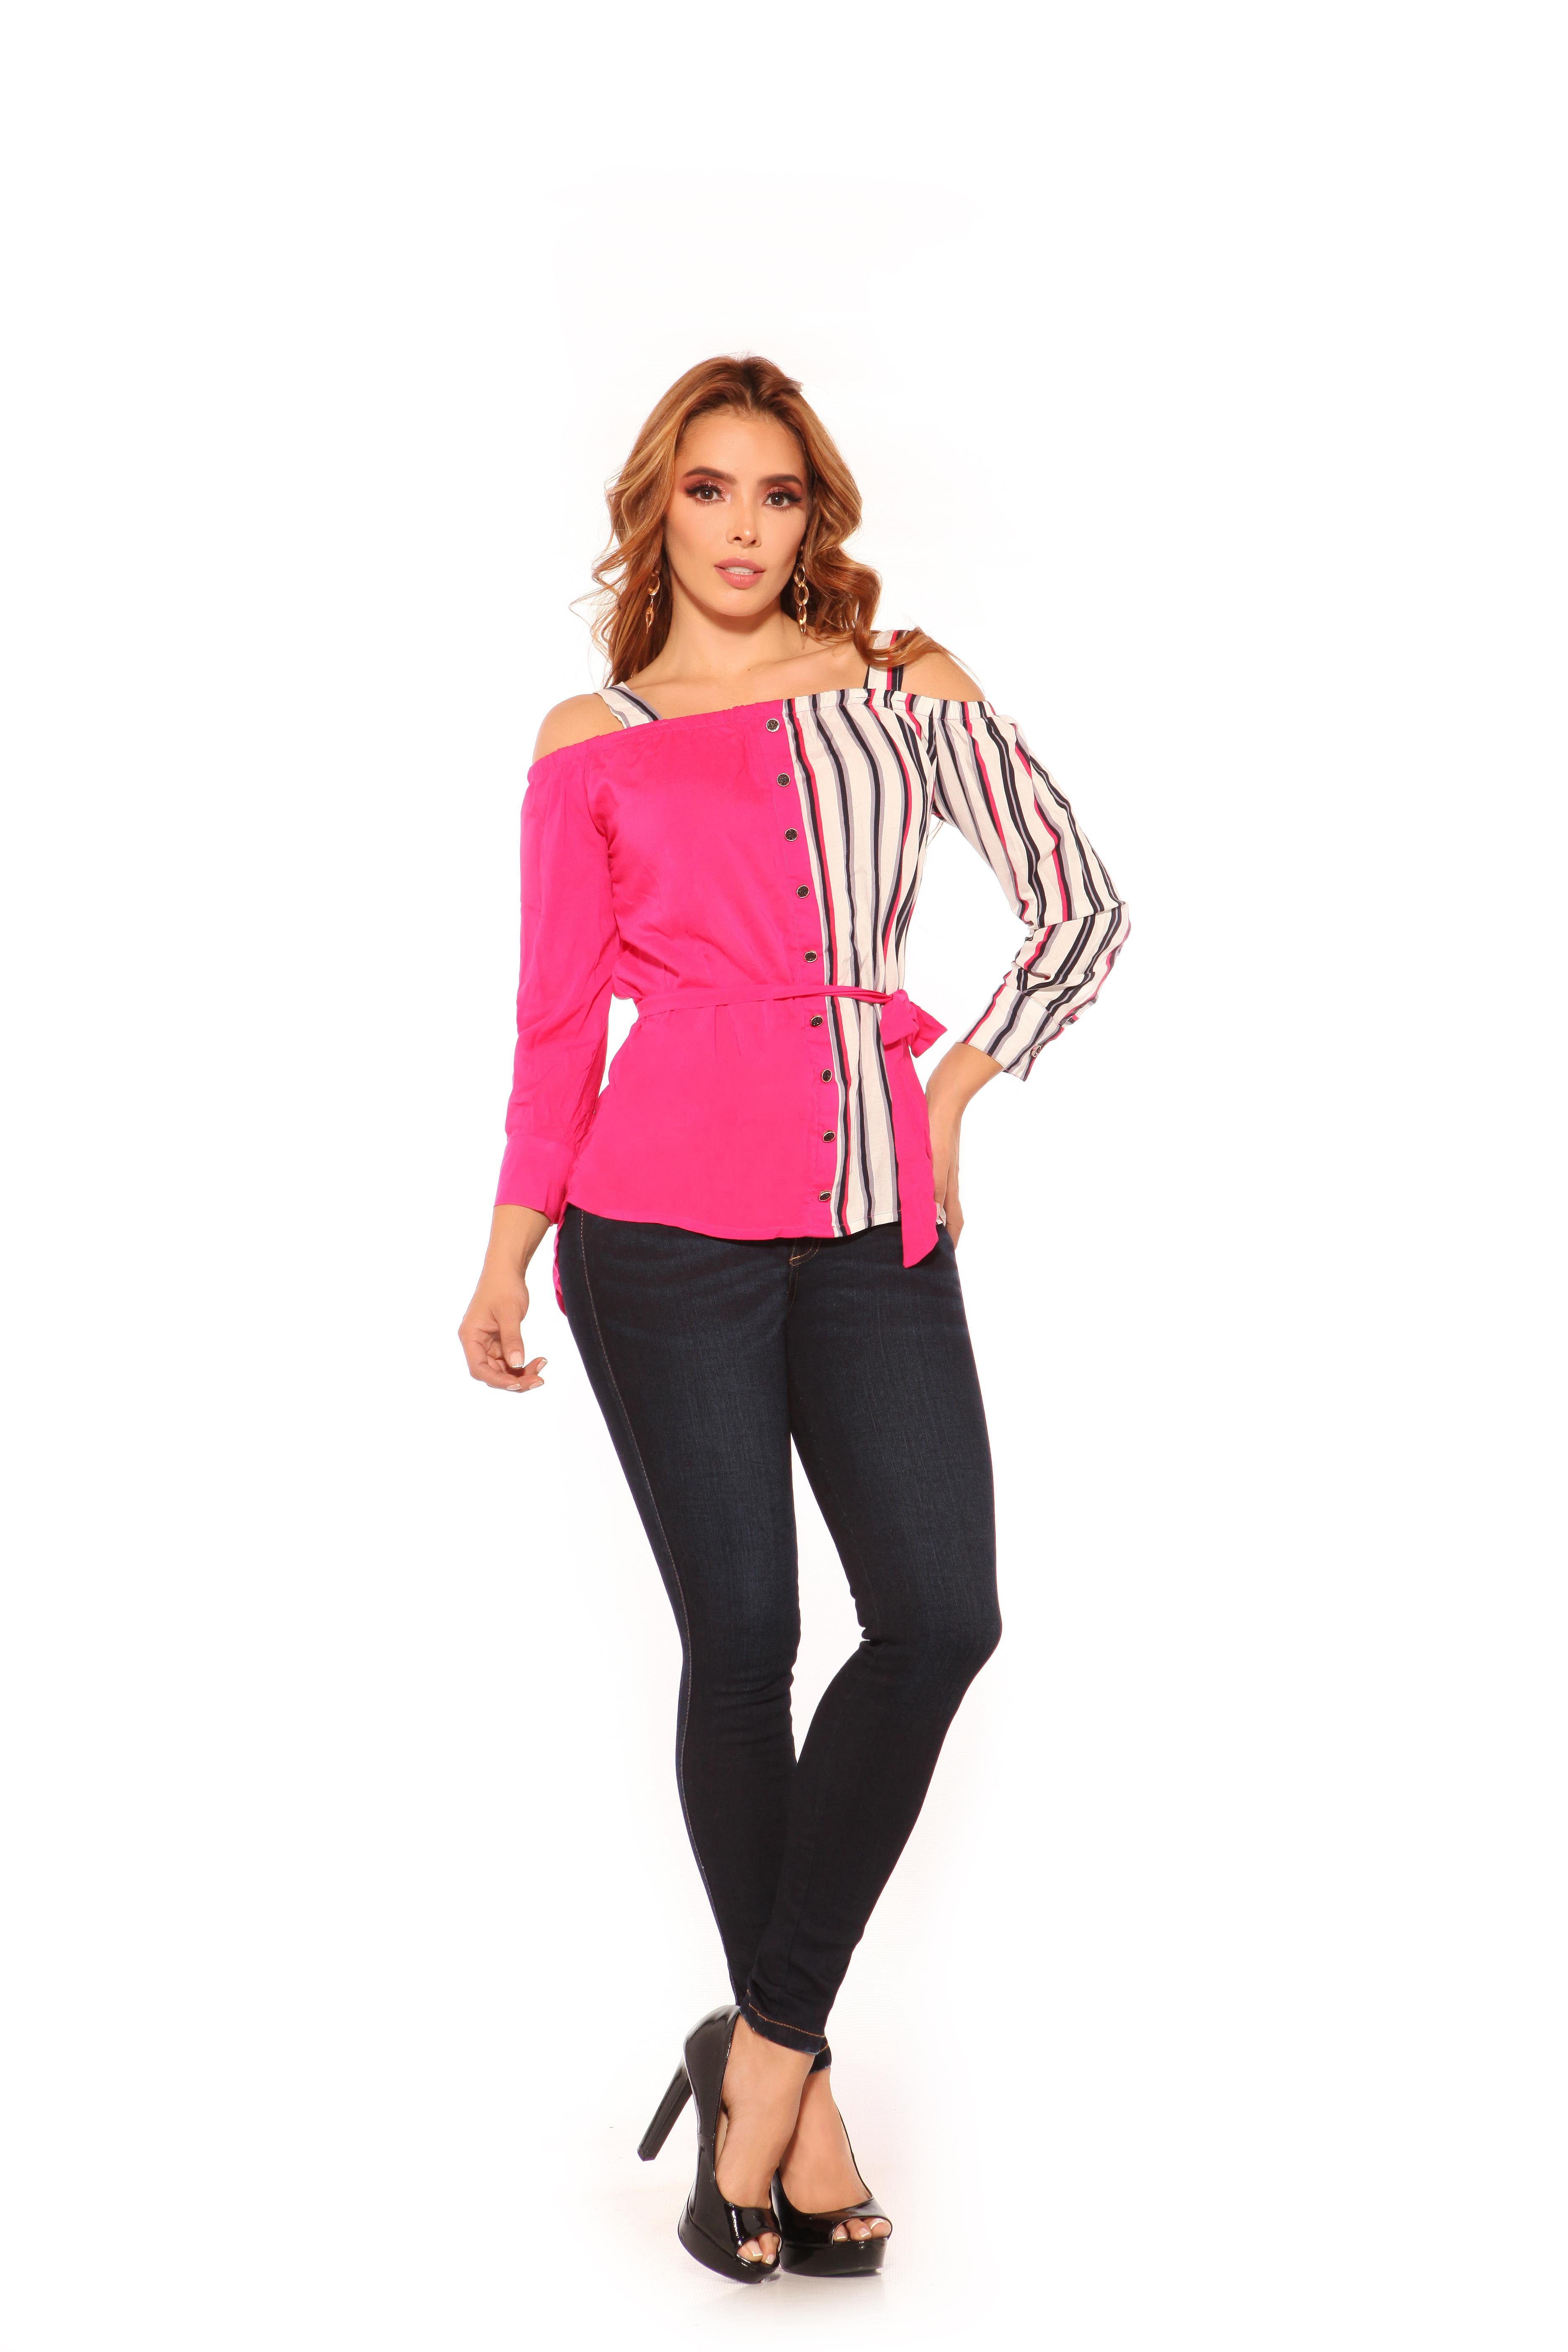 Colombian Blouse of Fashion, Colors and Seasonal Design